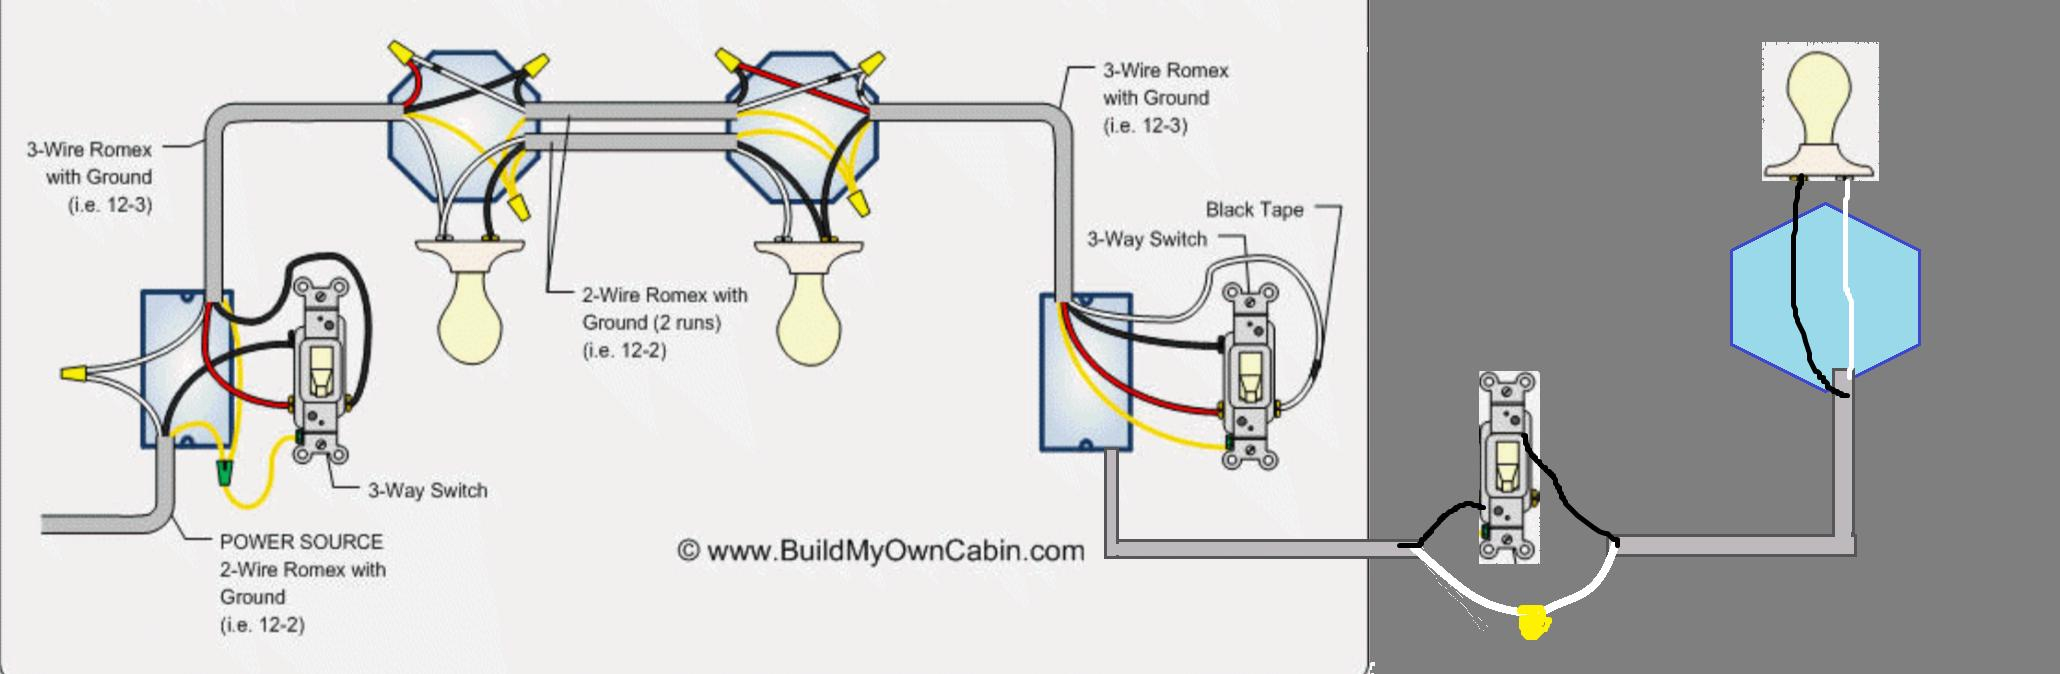 Wiring - Going From 3 Way Switch To A Regular Switch - Home - 3 Way Switch Wiring Diagram Power At Switch